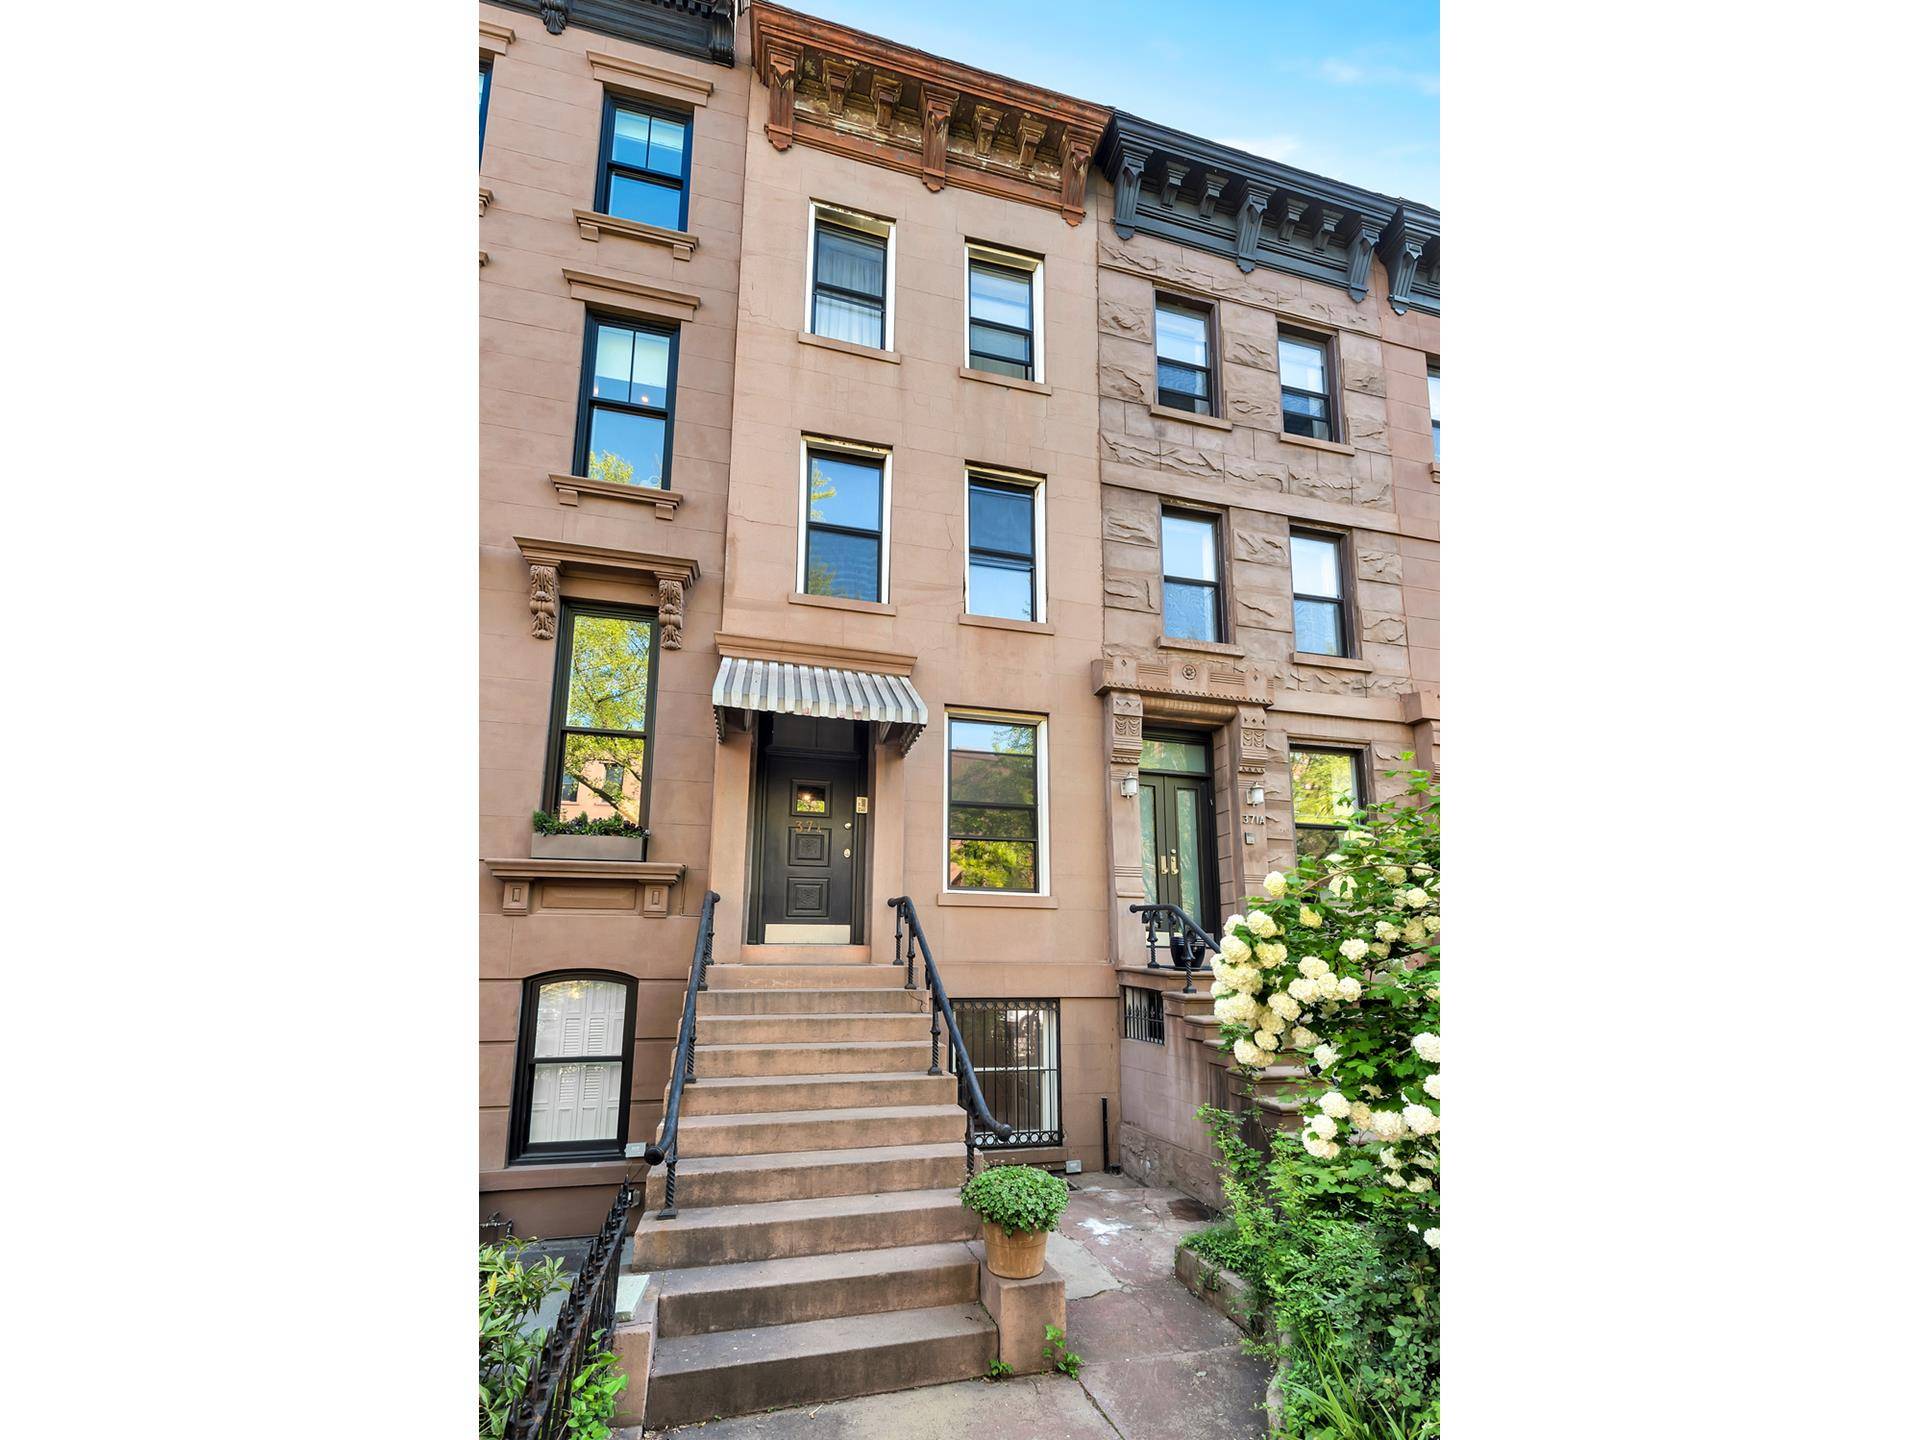 Come explore the charm and uniqueness of this exceptional four story, two family Brownstone, set on one of the best blocks in vibrant Carroll Gardens.